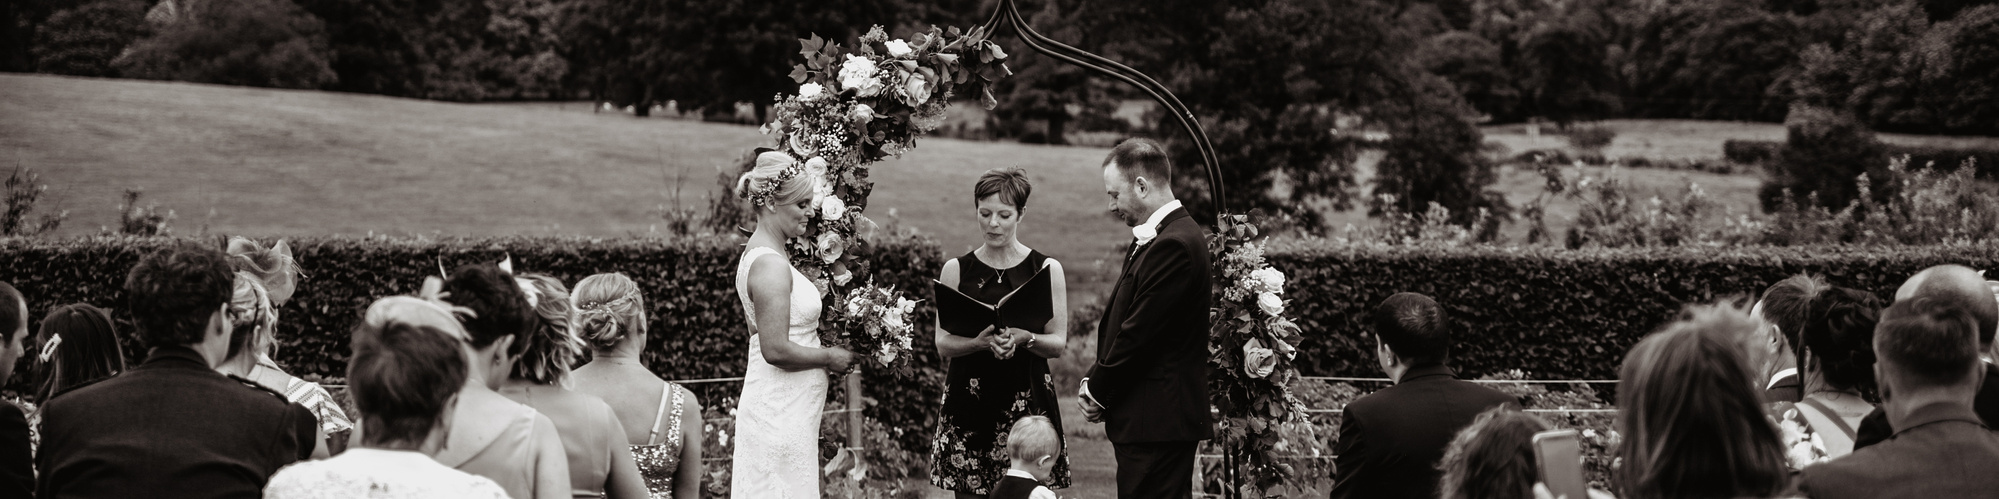 bride and groom outdoor ceremony in black and white photograph